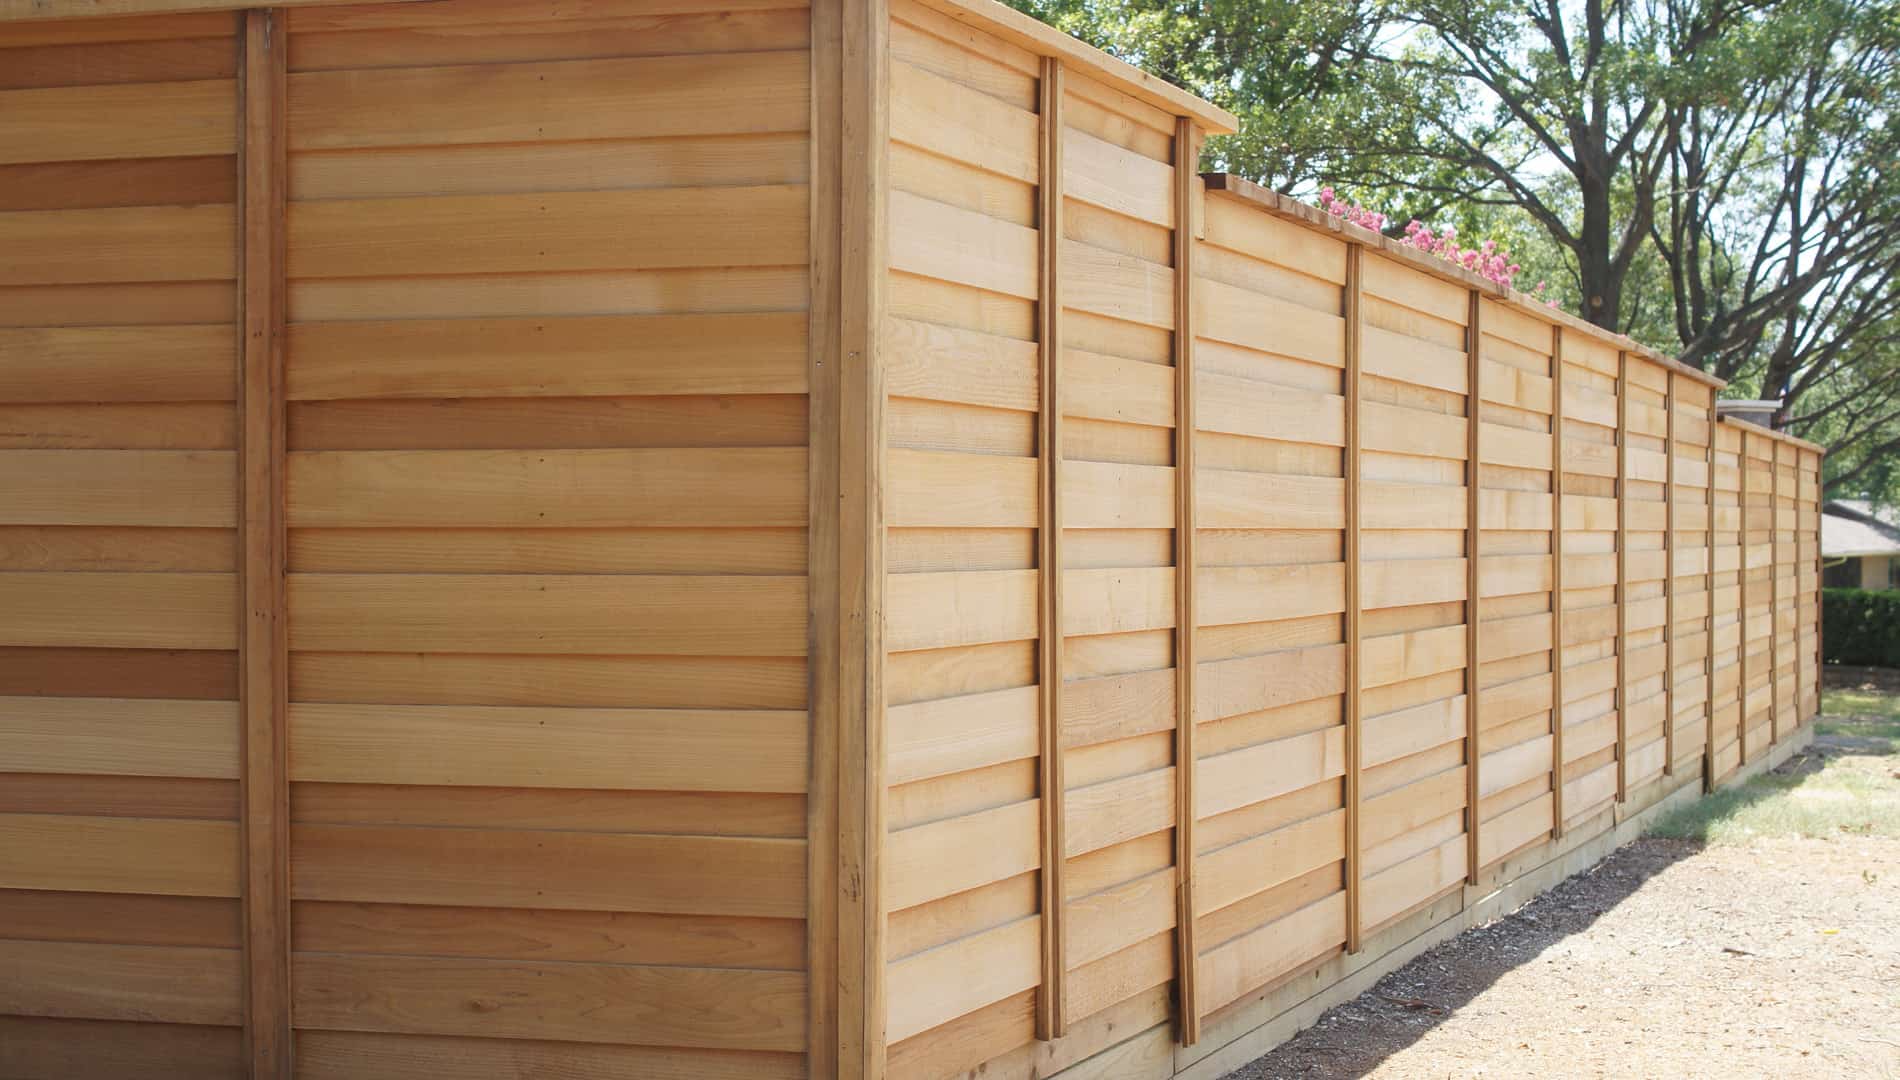 What Is The Cost Of Installing A Fence